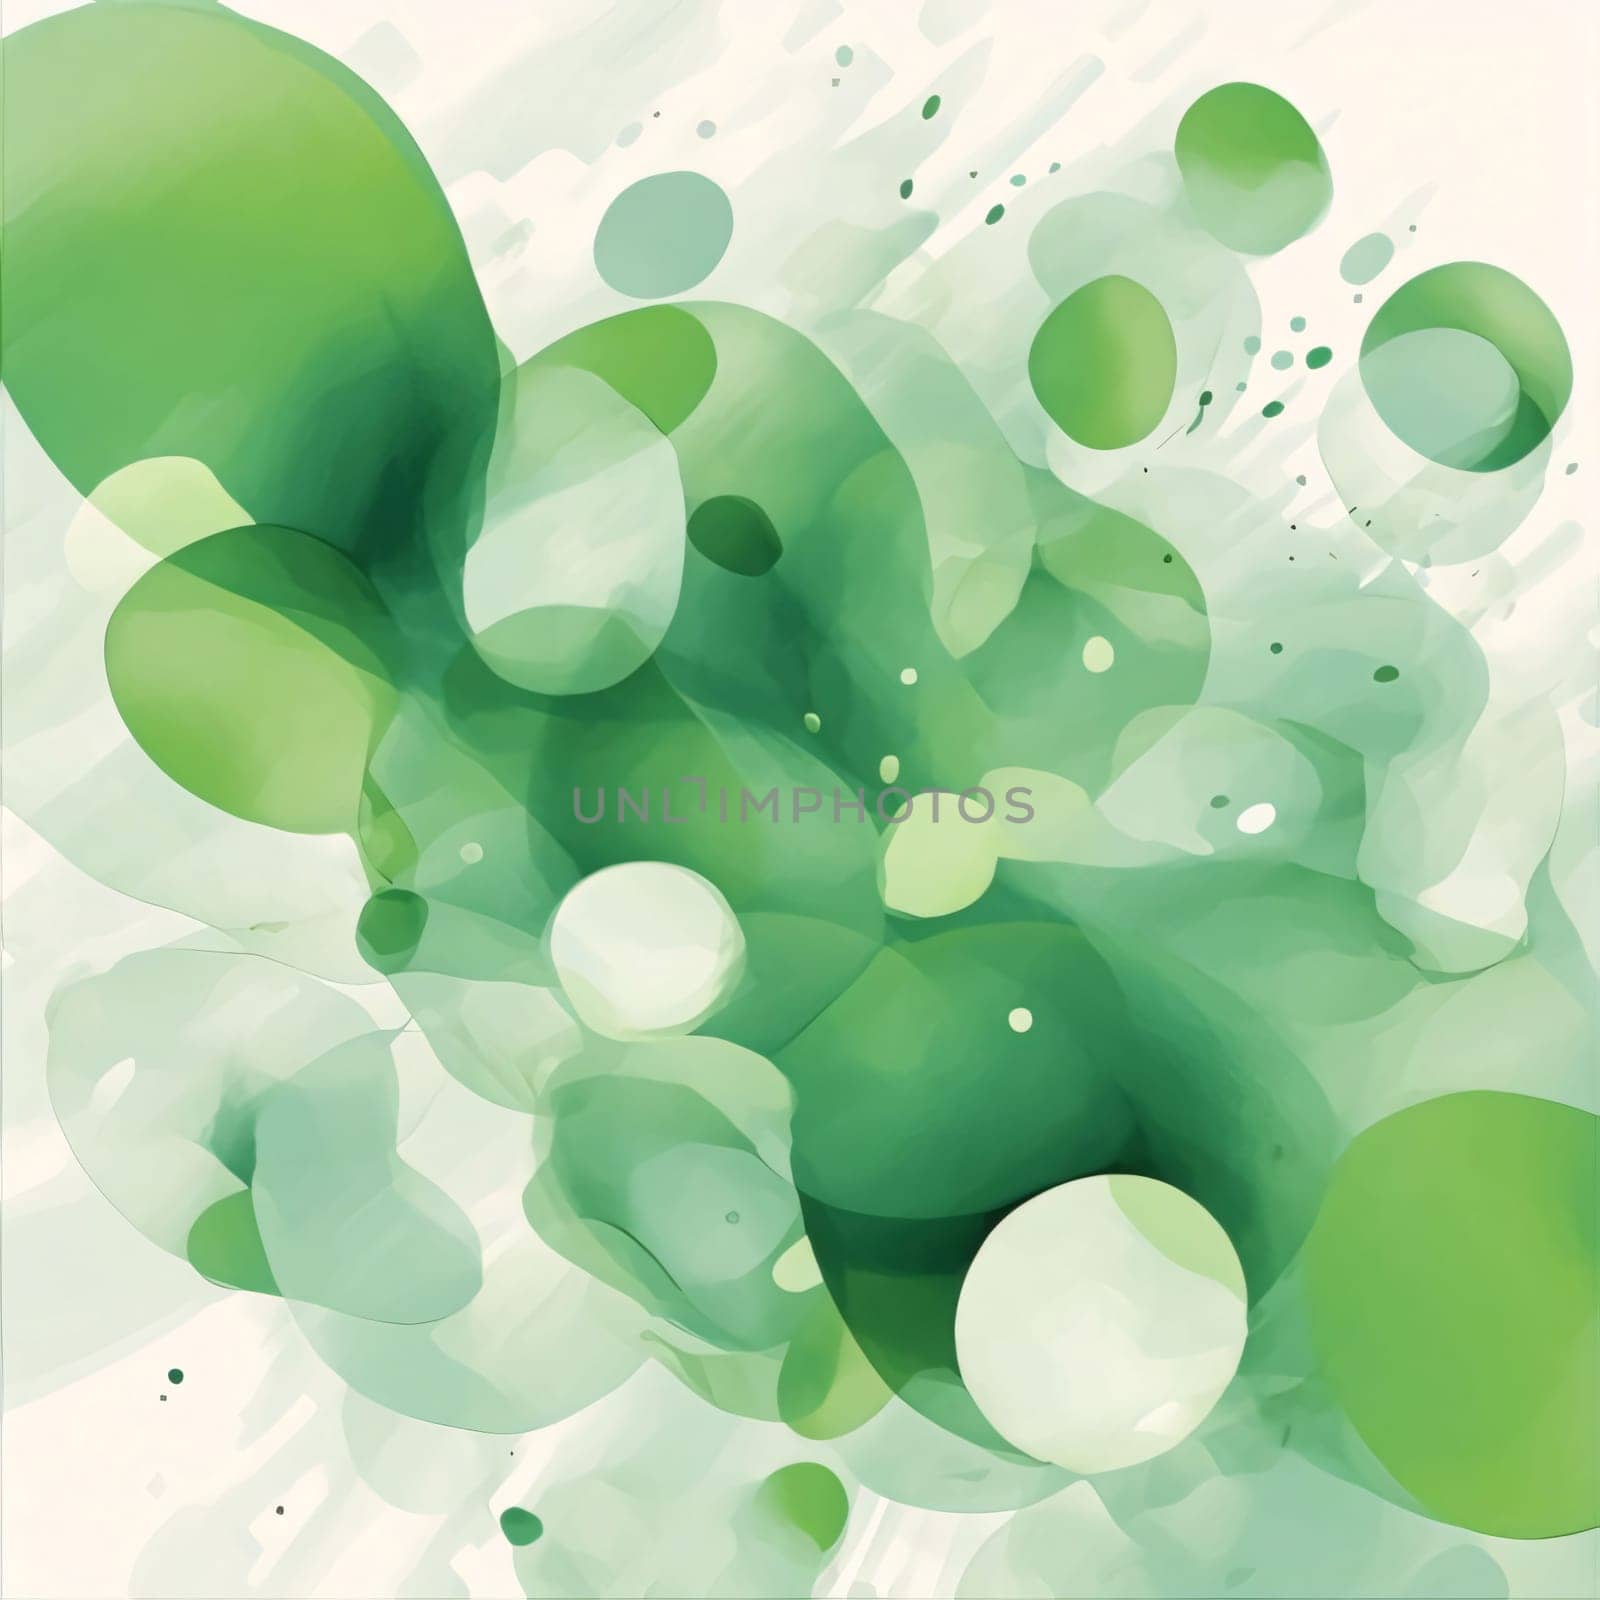 Abstract background design: Abstract watercolor vector background. Hand drawn illustration with green paint splashes.